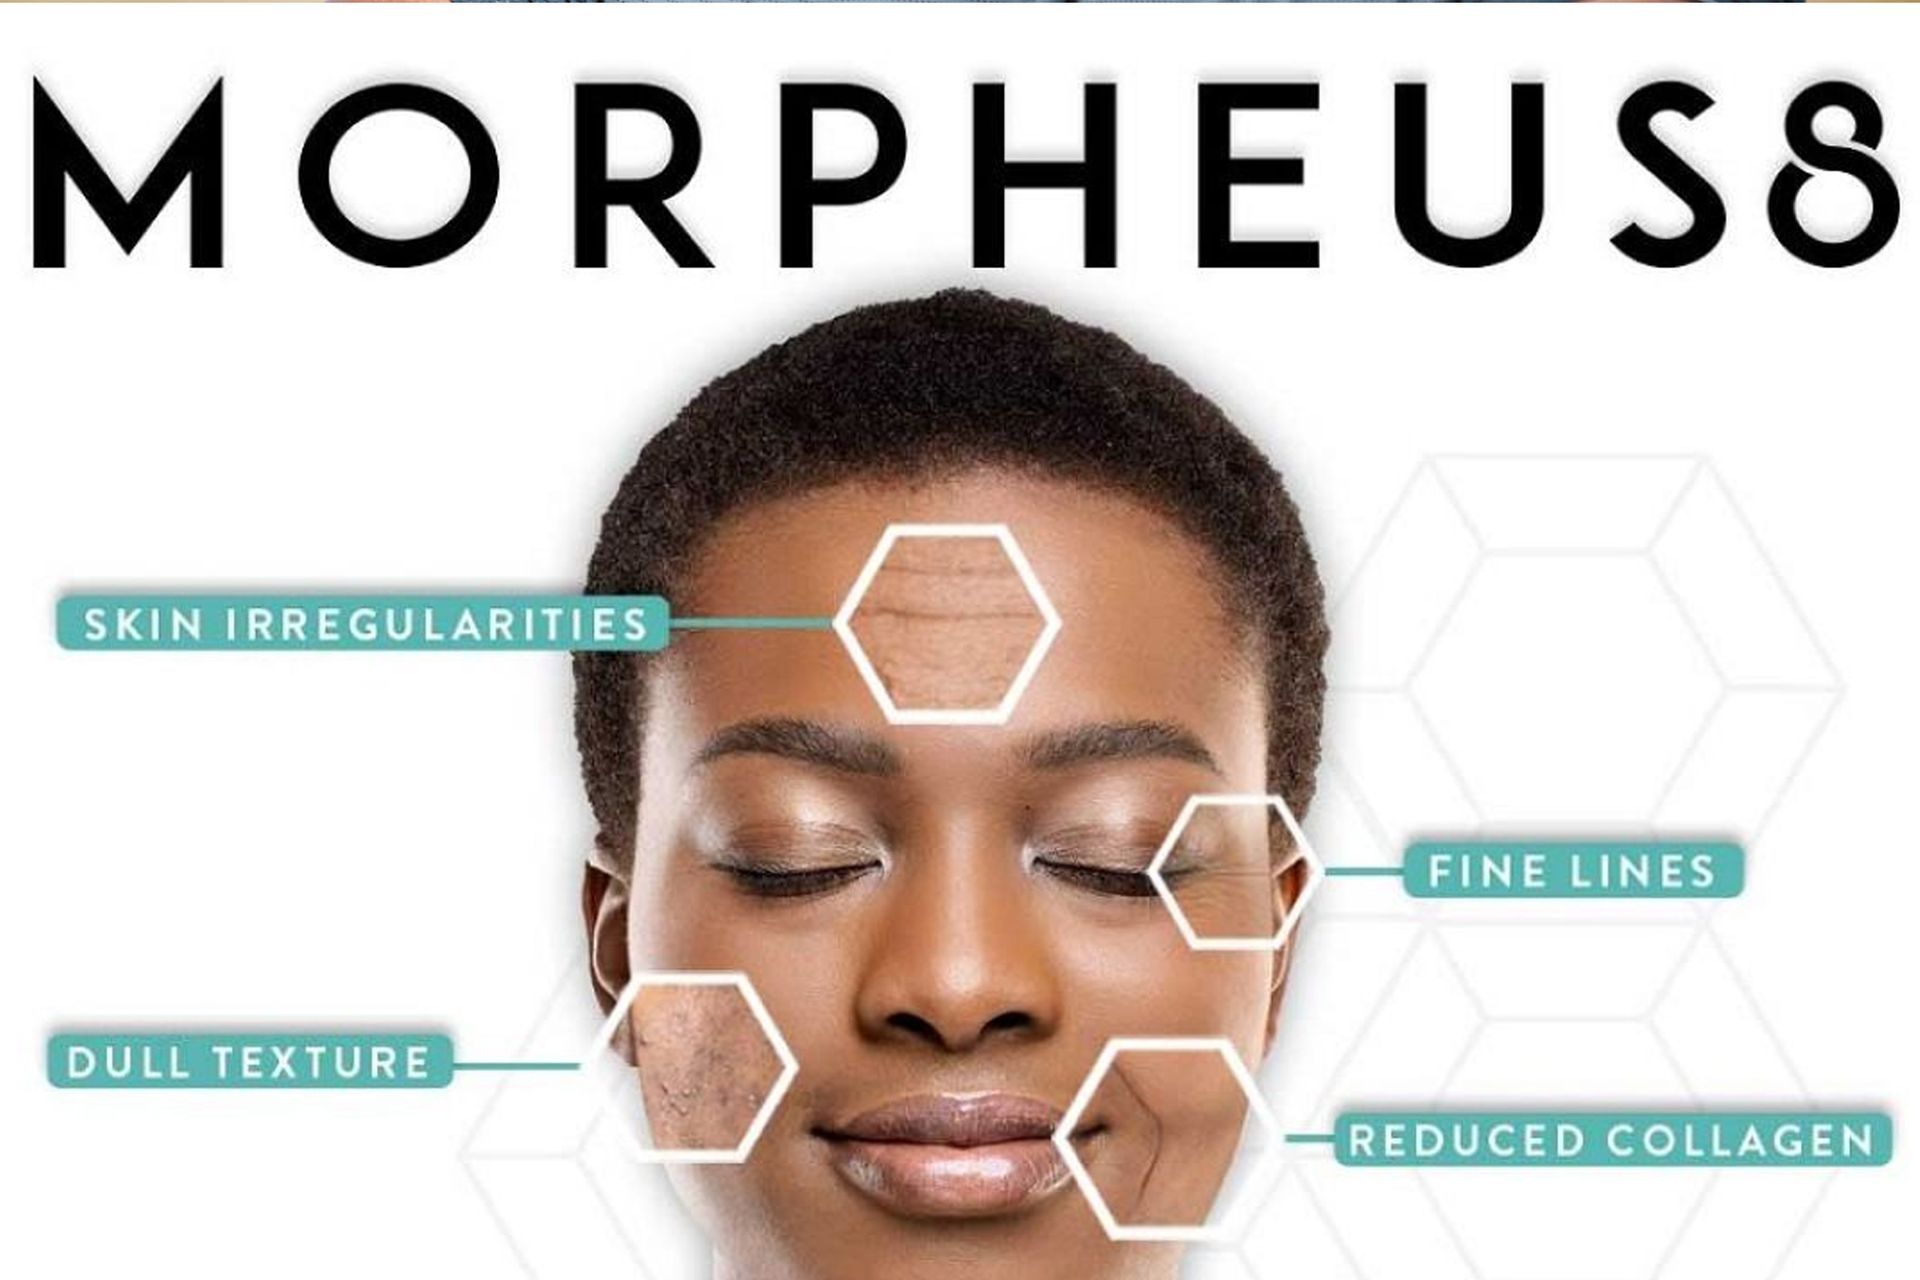 Morpheus 8 skin tightening (face and body)